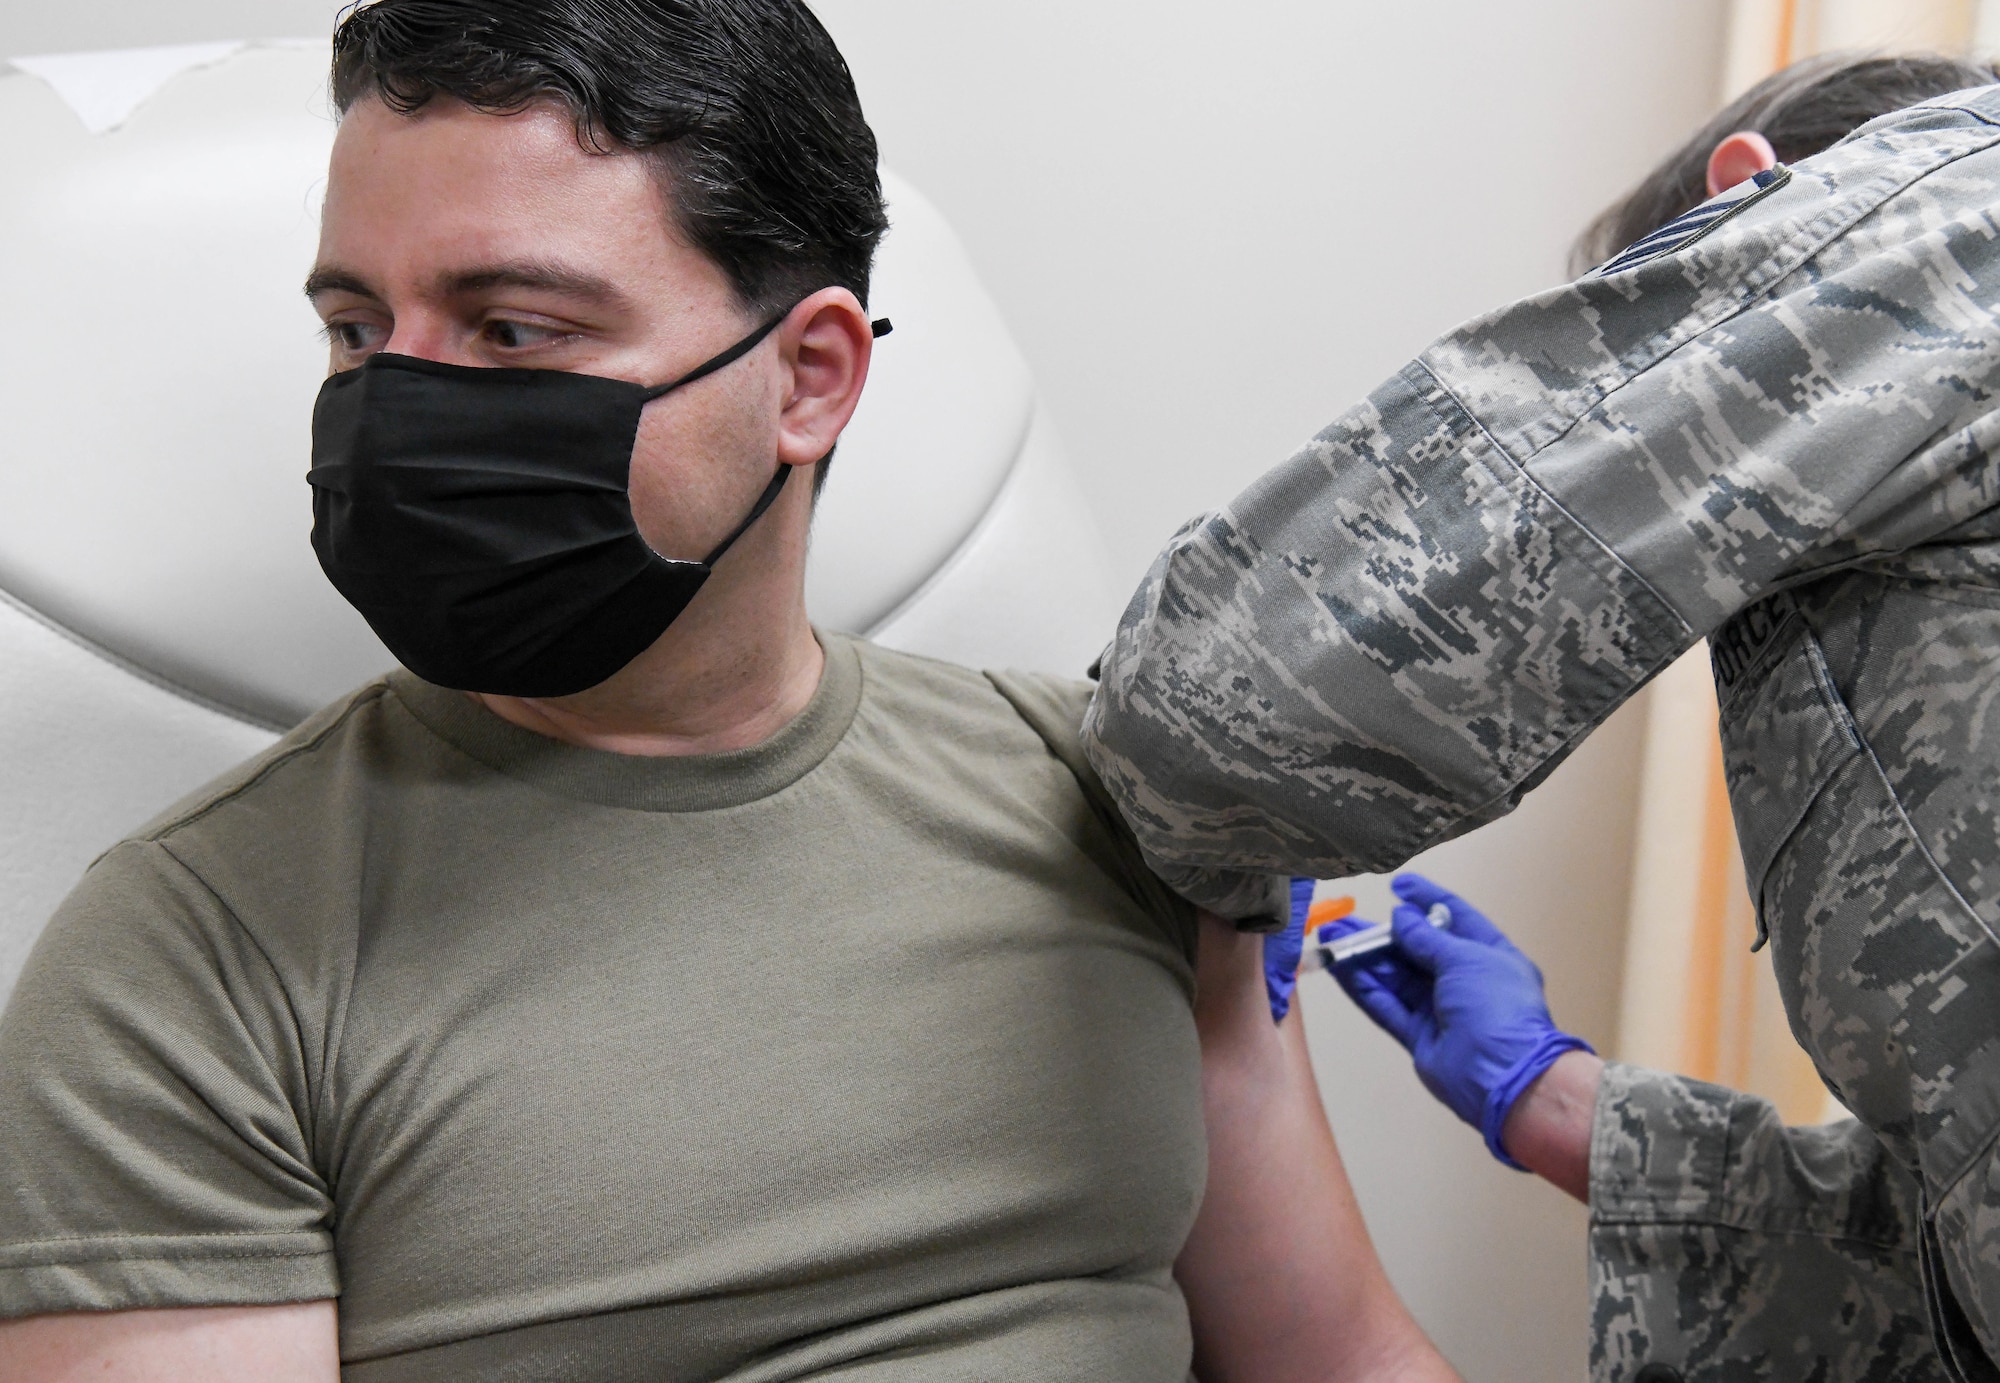 Master Sgt. Marti Stanley with the Tennessee Air National Guard administers a COVID-19 vaccine to Capt. Christopher Fernandez, an Arnold Engineering Development Complex team member, at Arnold Air Force Base, Tenn., Feb. 23, 2021, at the Medical Aid Station on base. (U.S. Air Force photo by Jill Pickett)